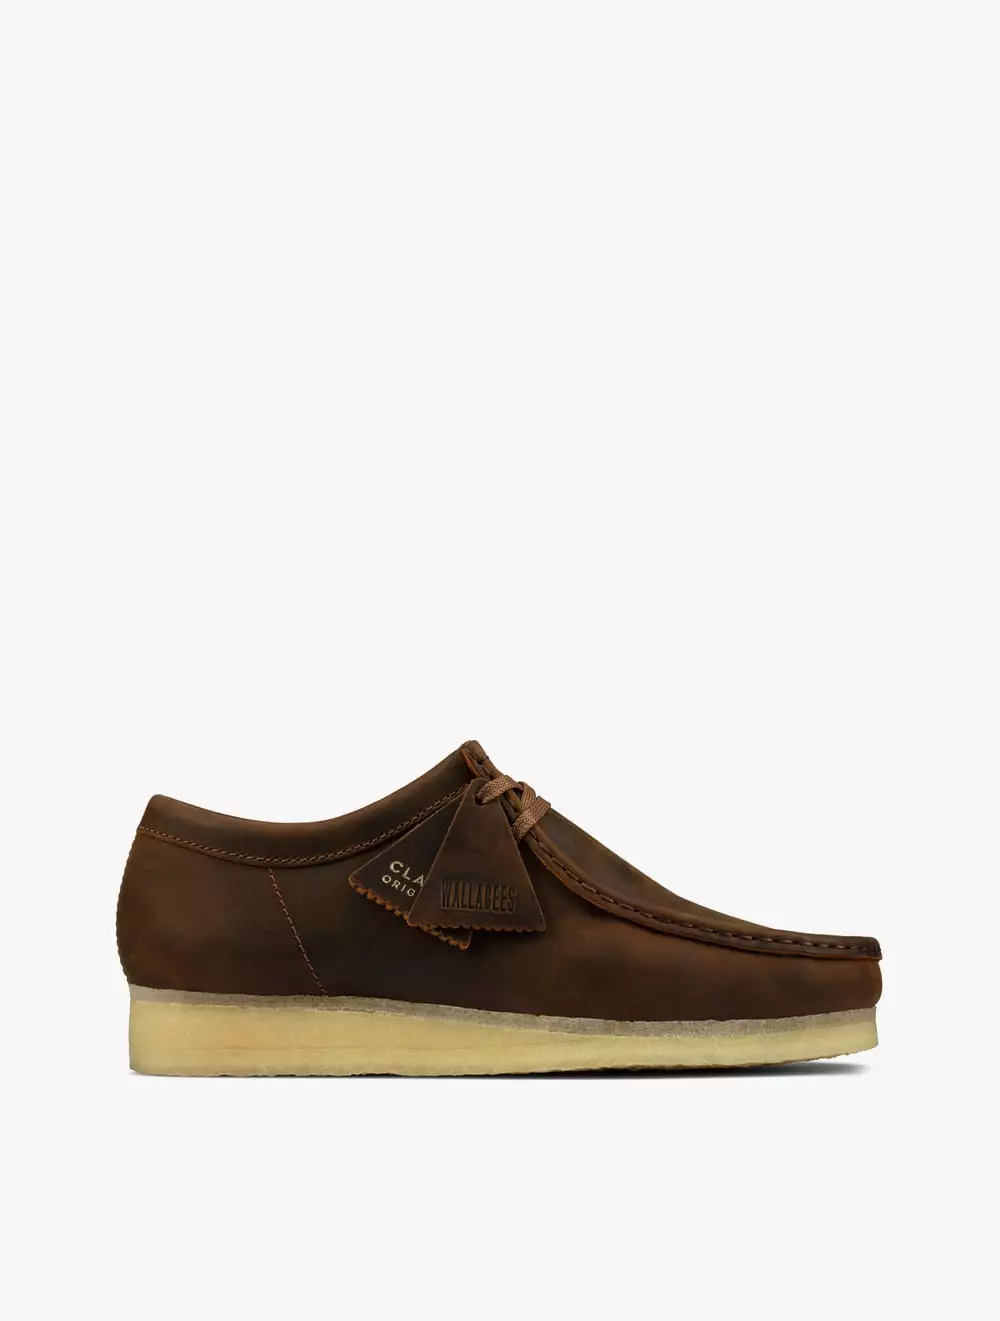 Clarks　WALLABEES